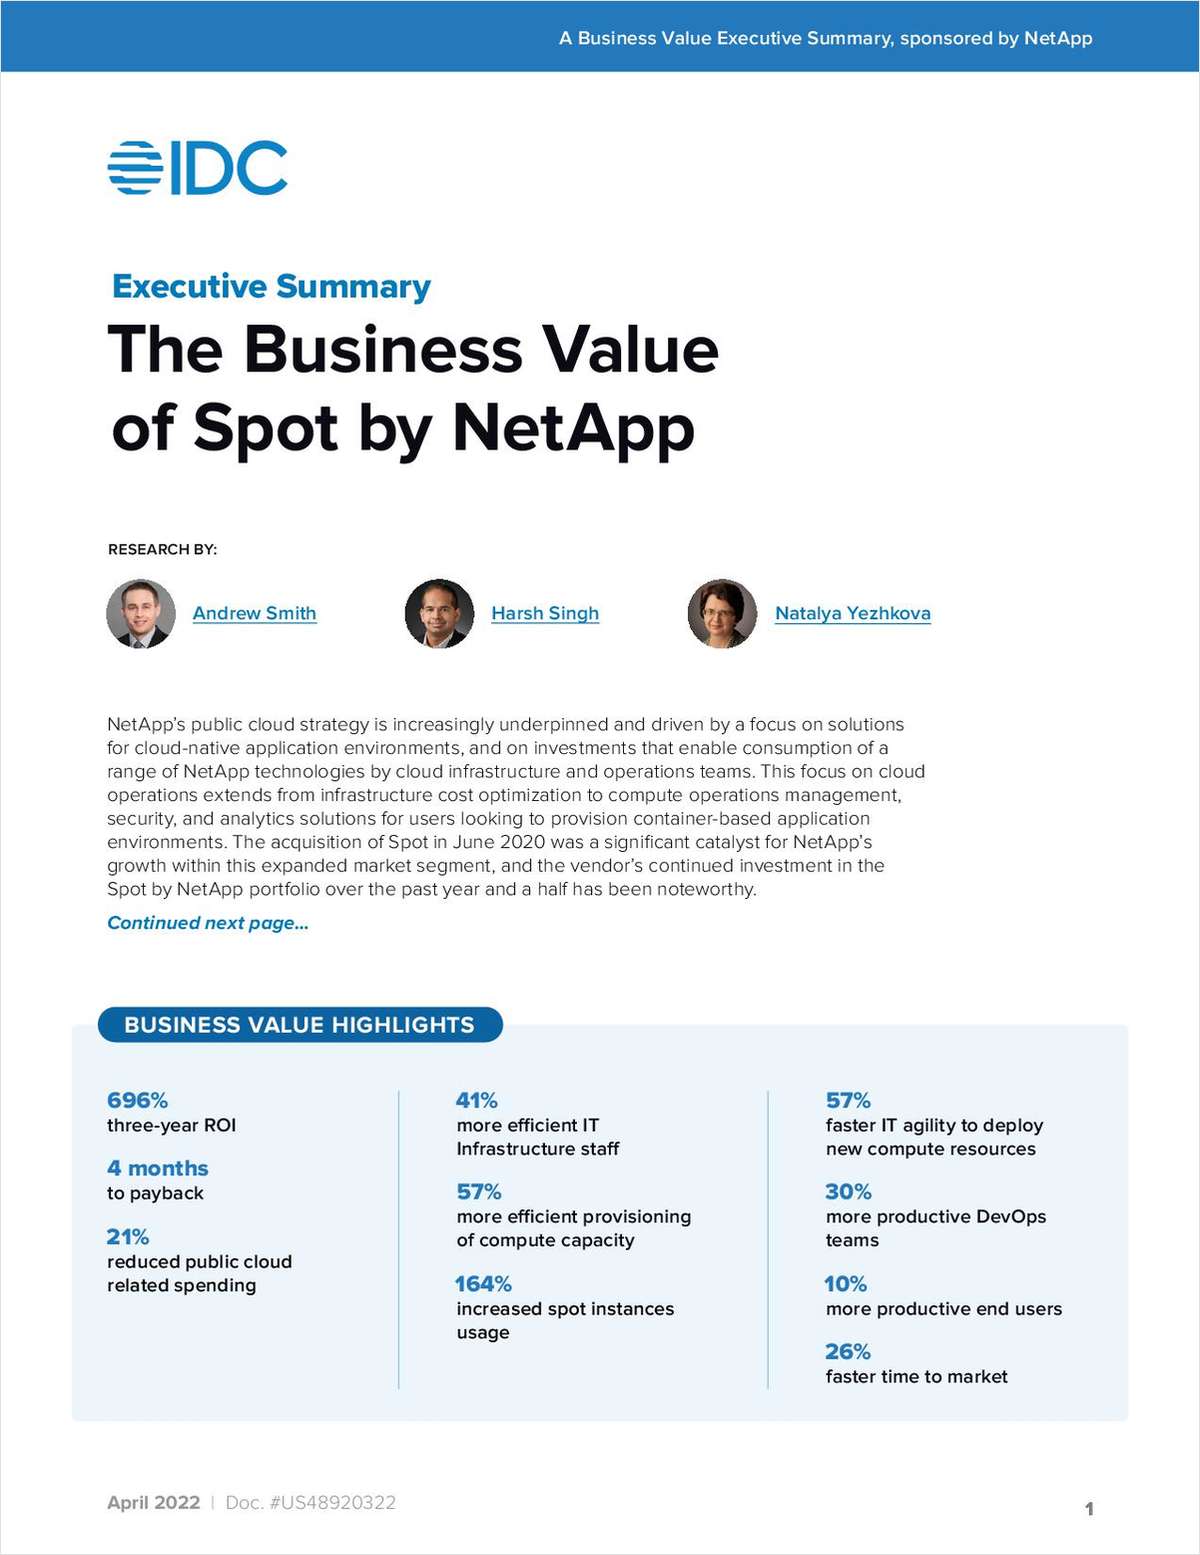 The Business Value of Spot by NetApp